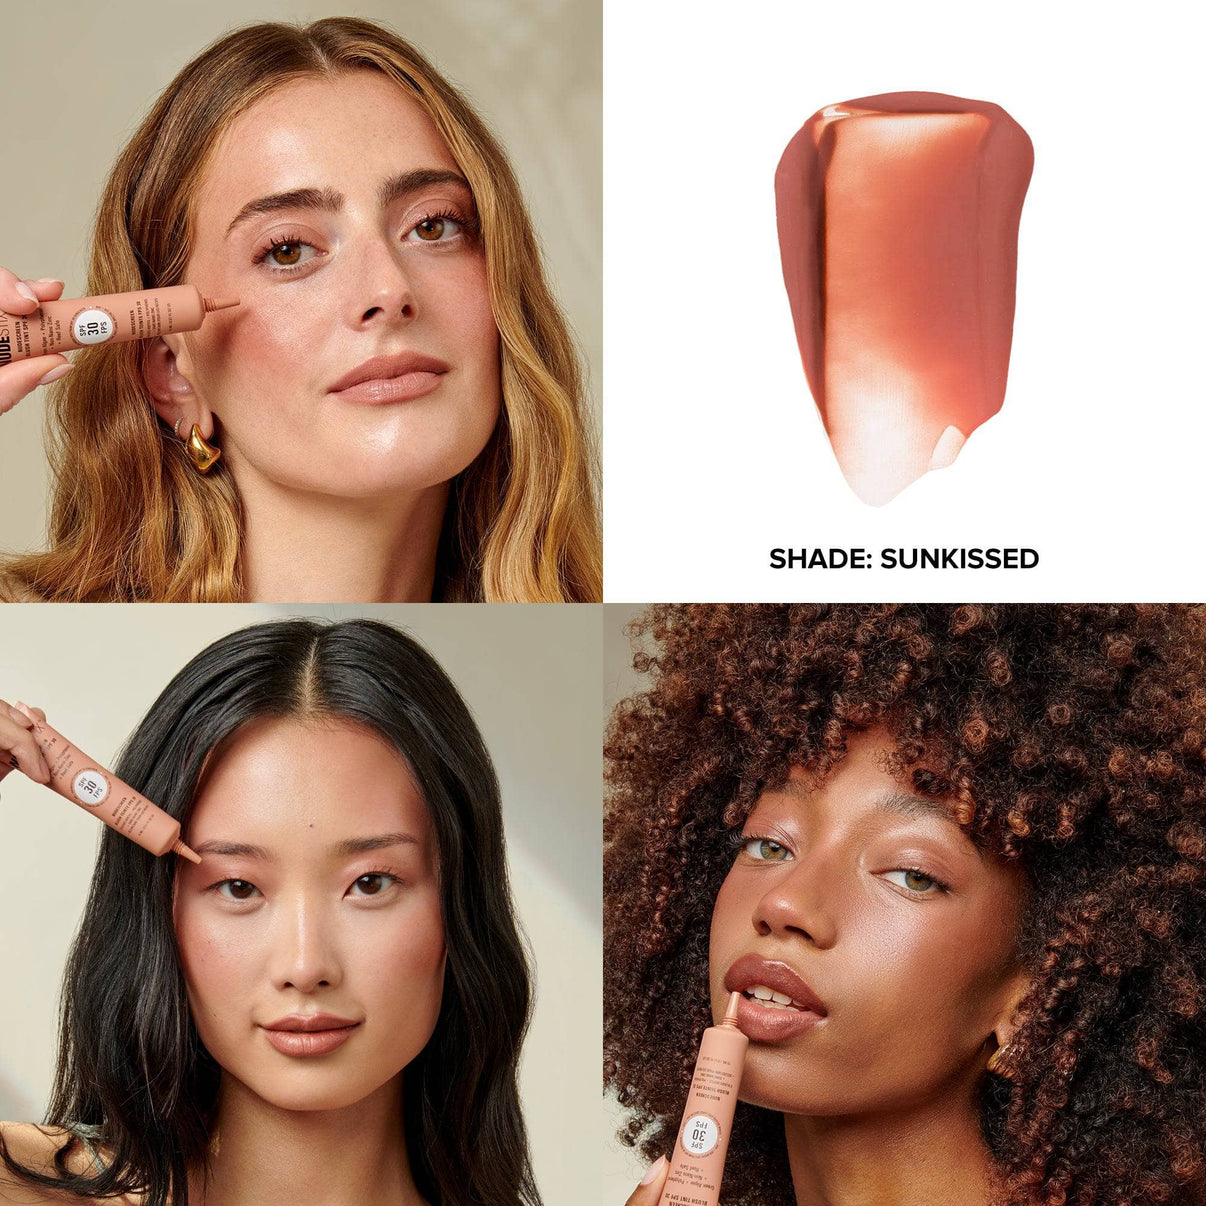 Grid with models applying Nudescreen blush tint in shade SUNKISSED